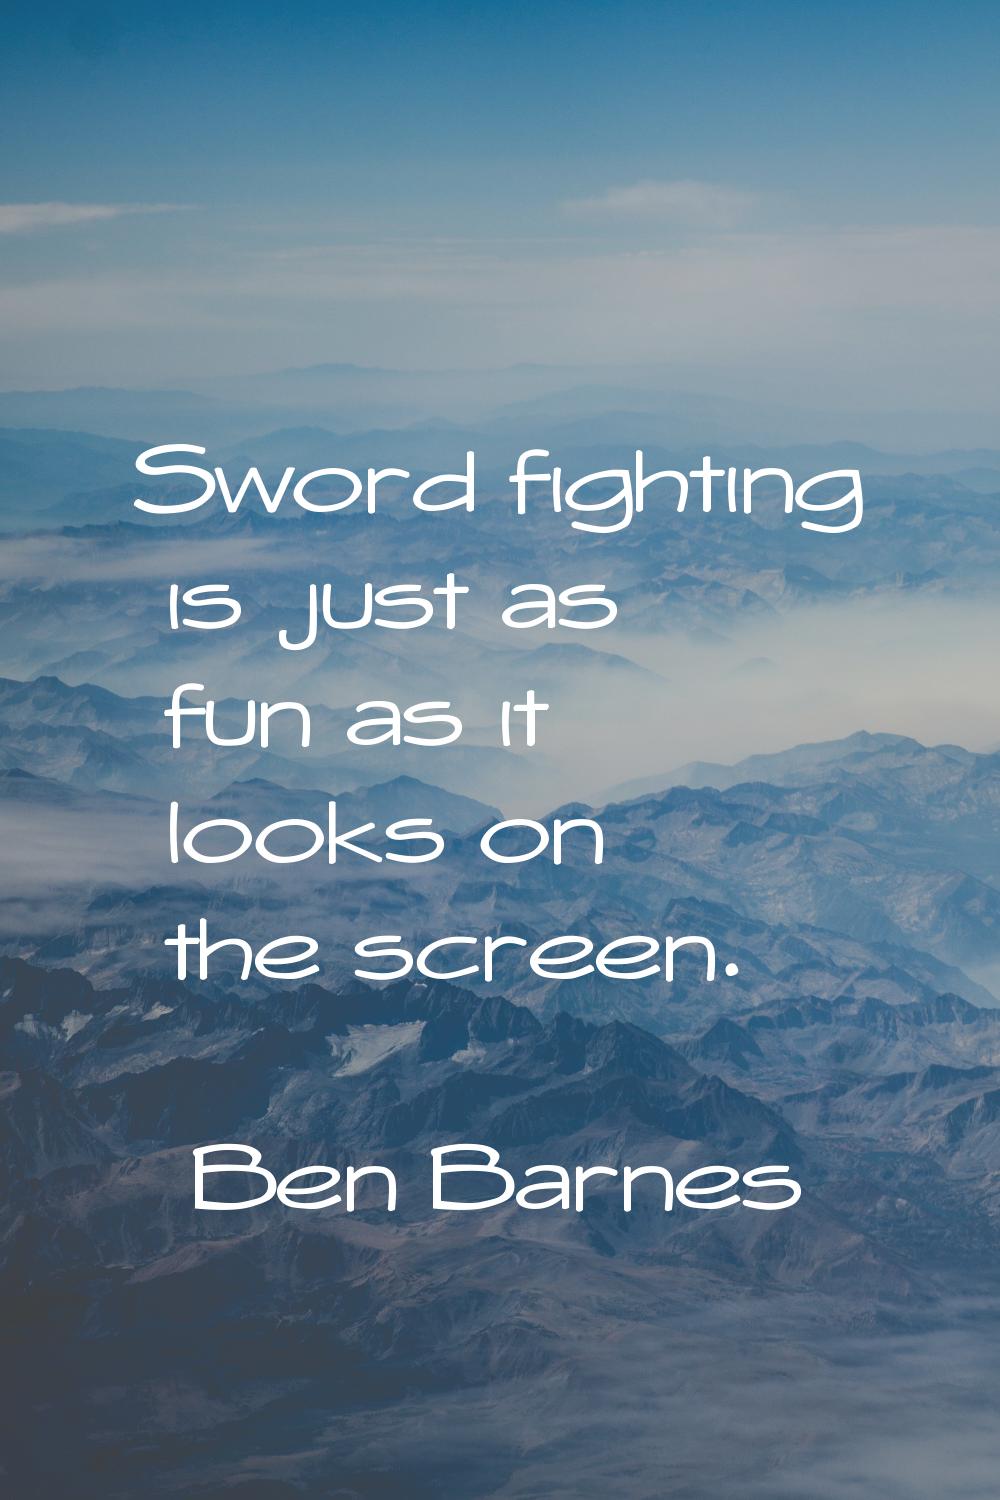 Sword fighting is just as fun as it looks on the screen.